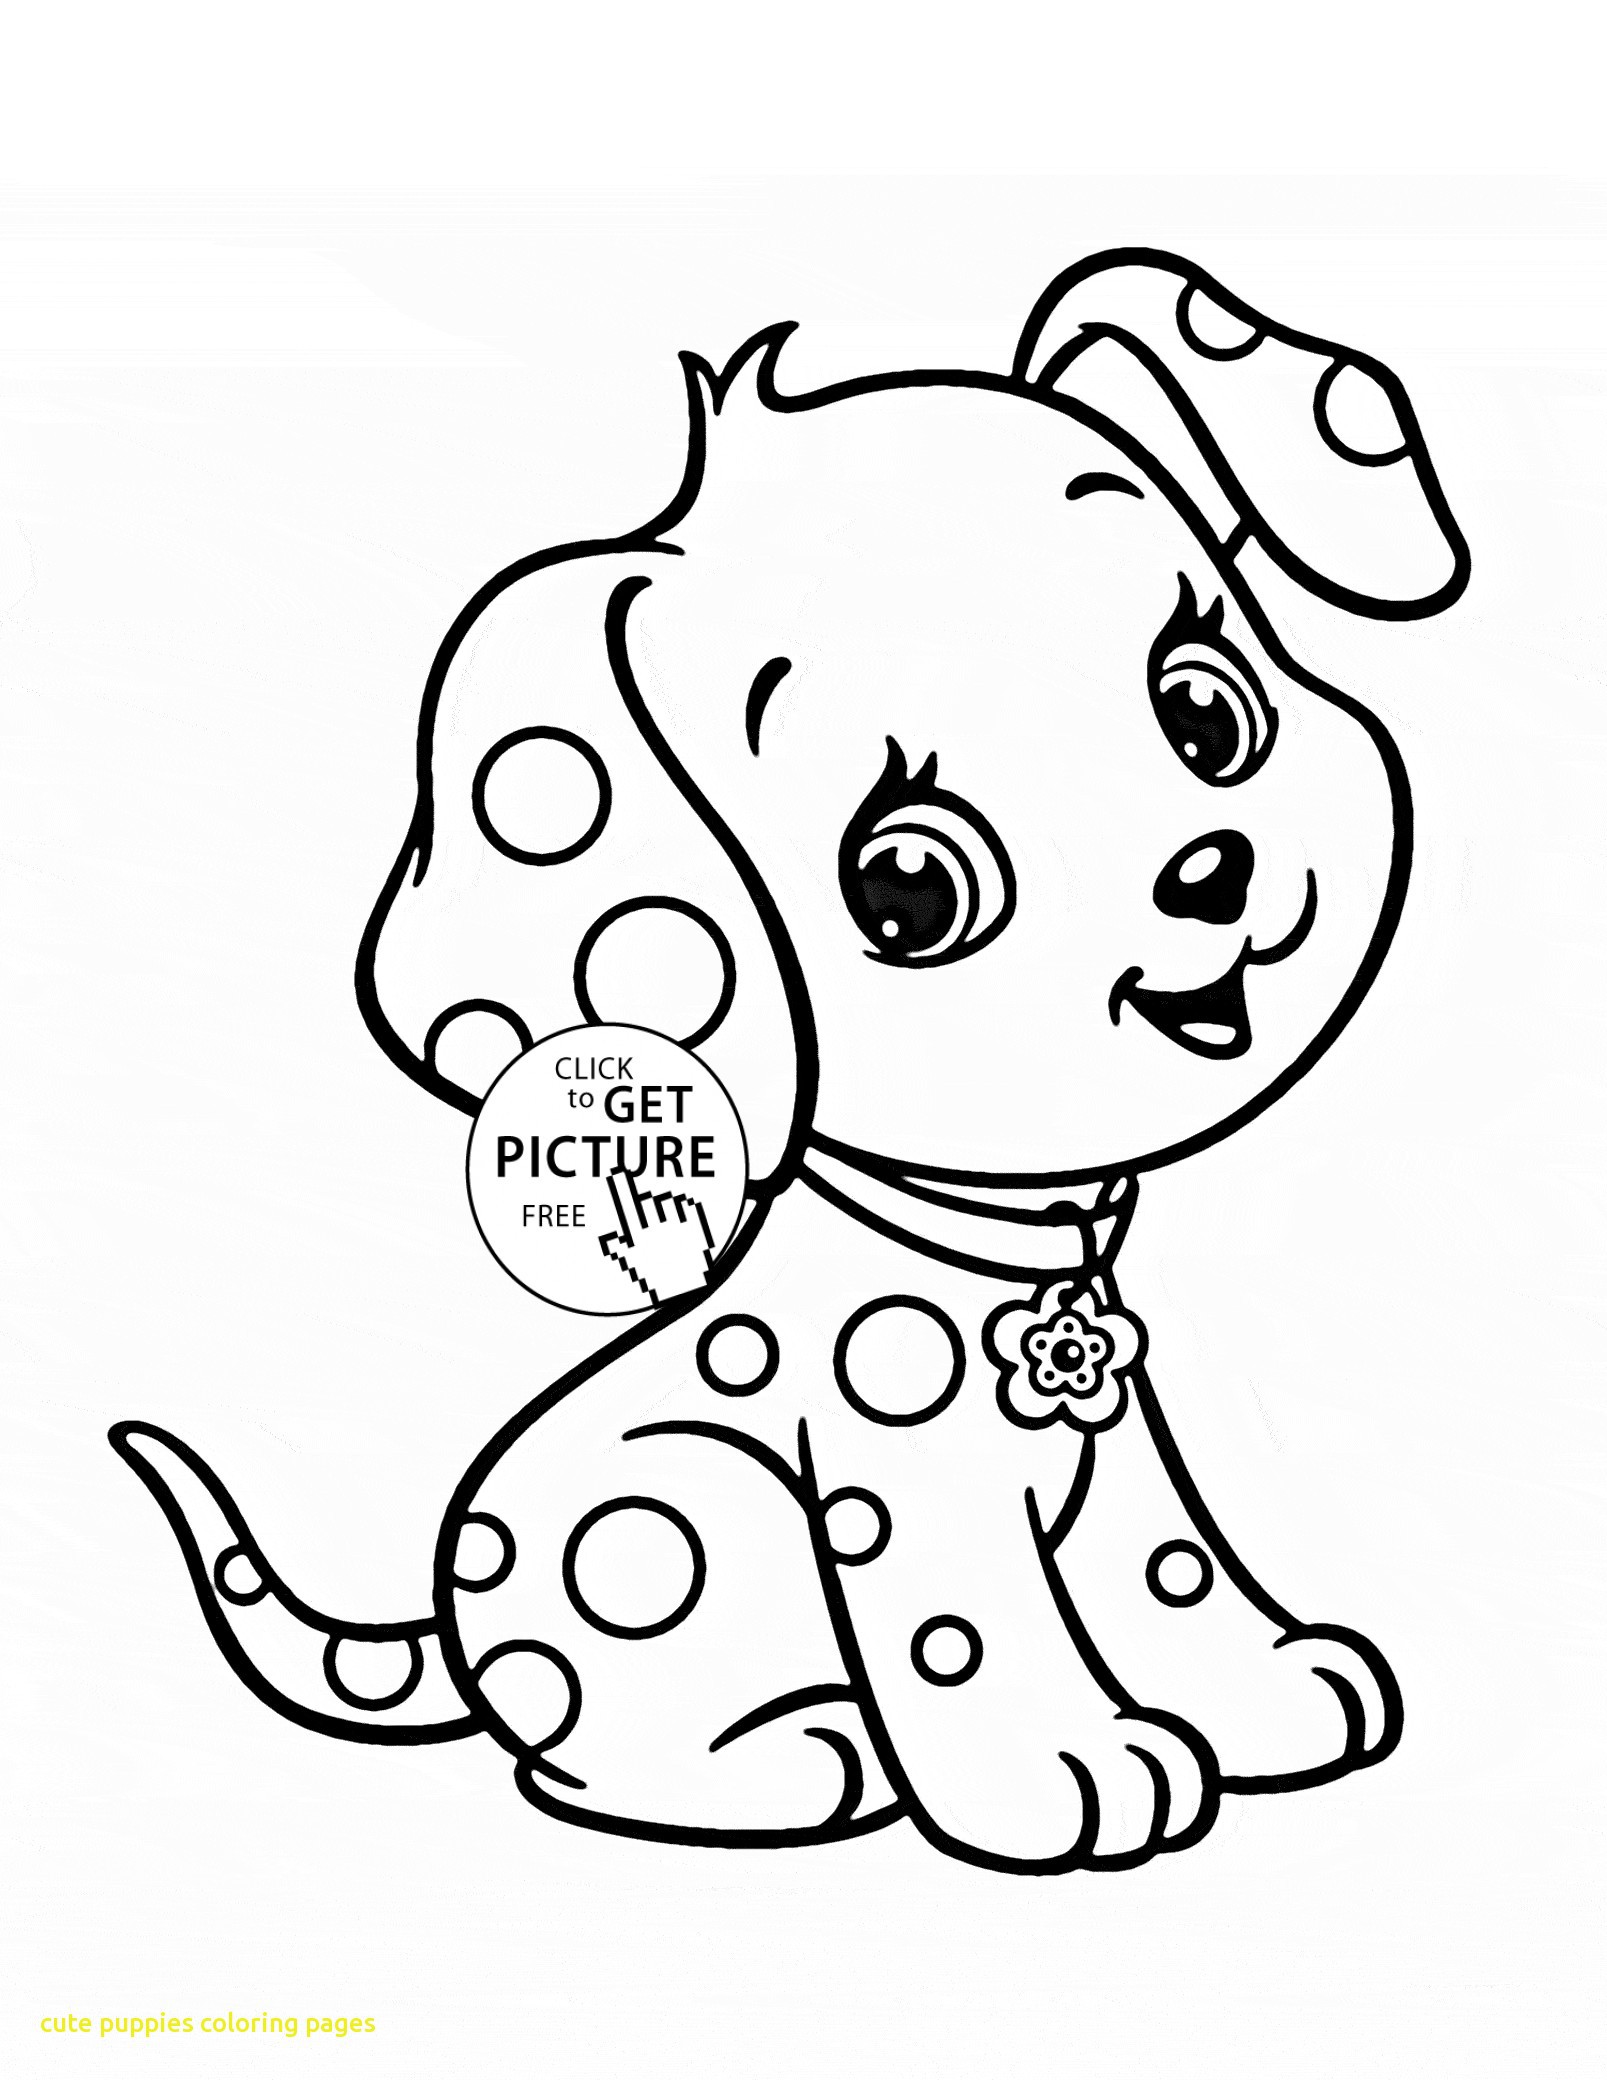 Best Cute Puppy Coloring Pages 37 For Your Coloring Pages line with Cute Puppy Coloring Pages